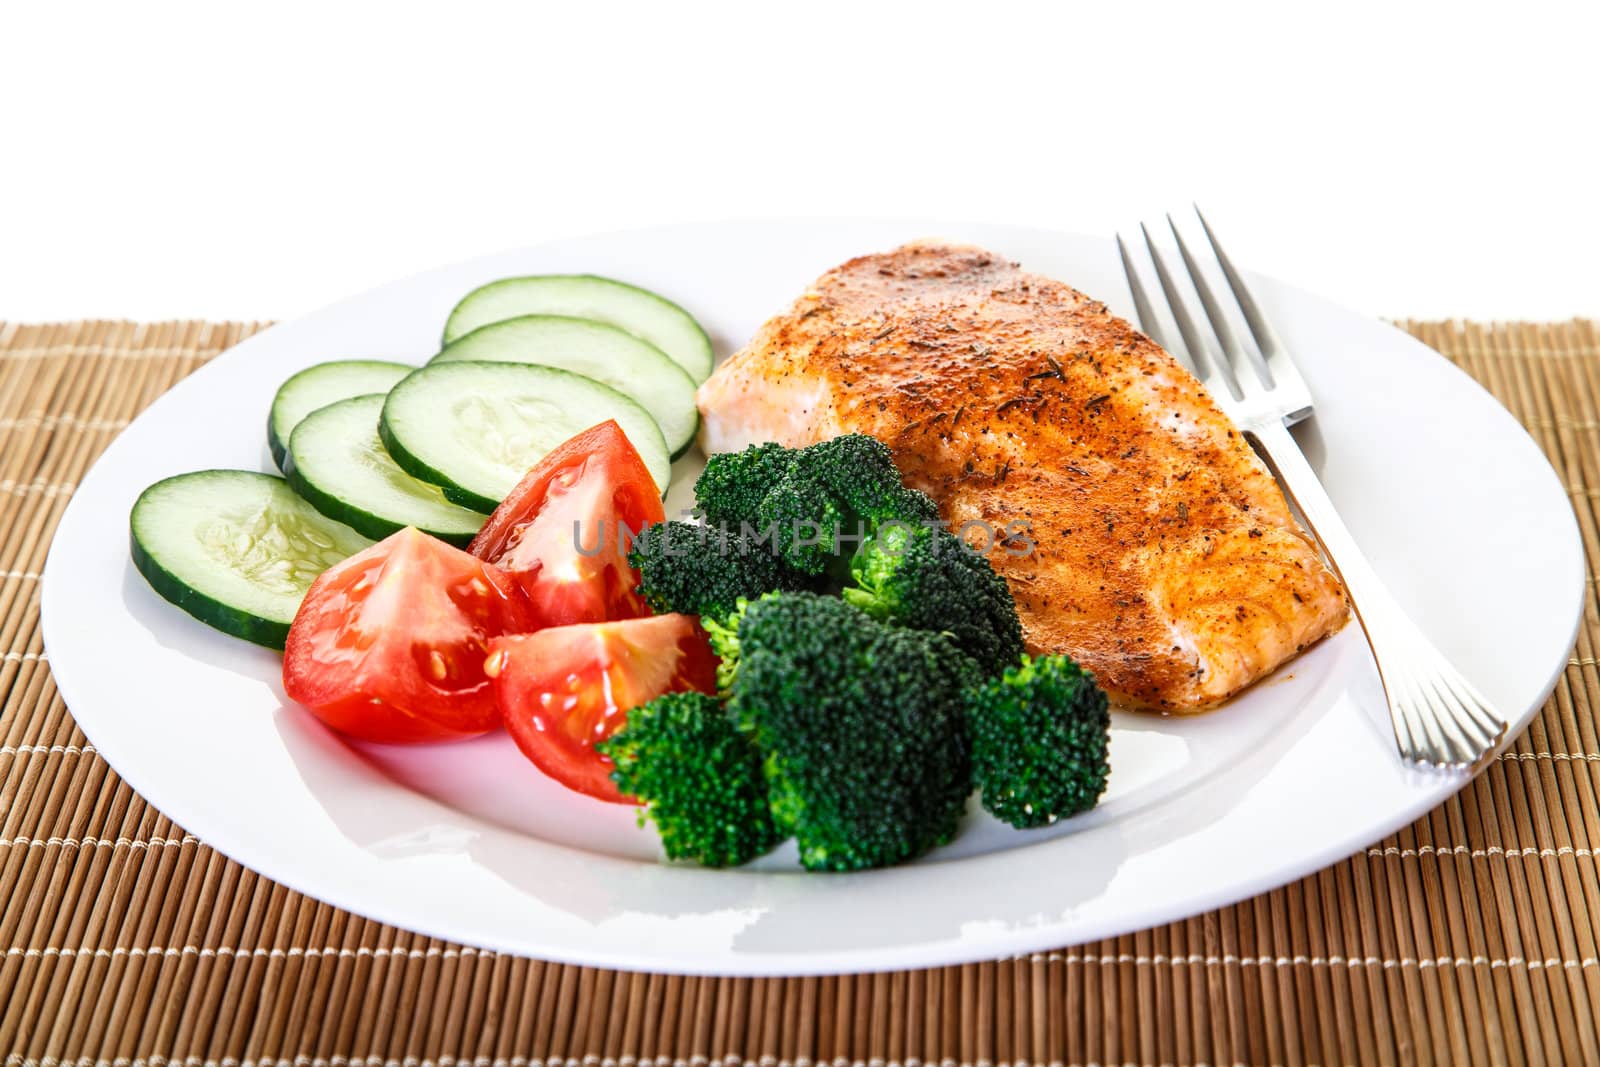 Baked Salmon with Vegetables and Fork by dbvirago